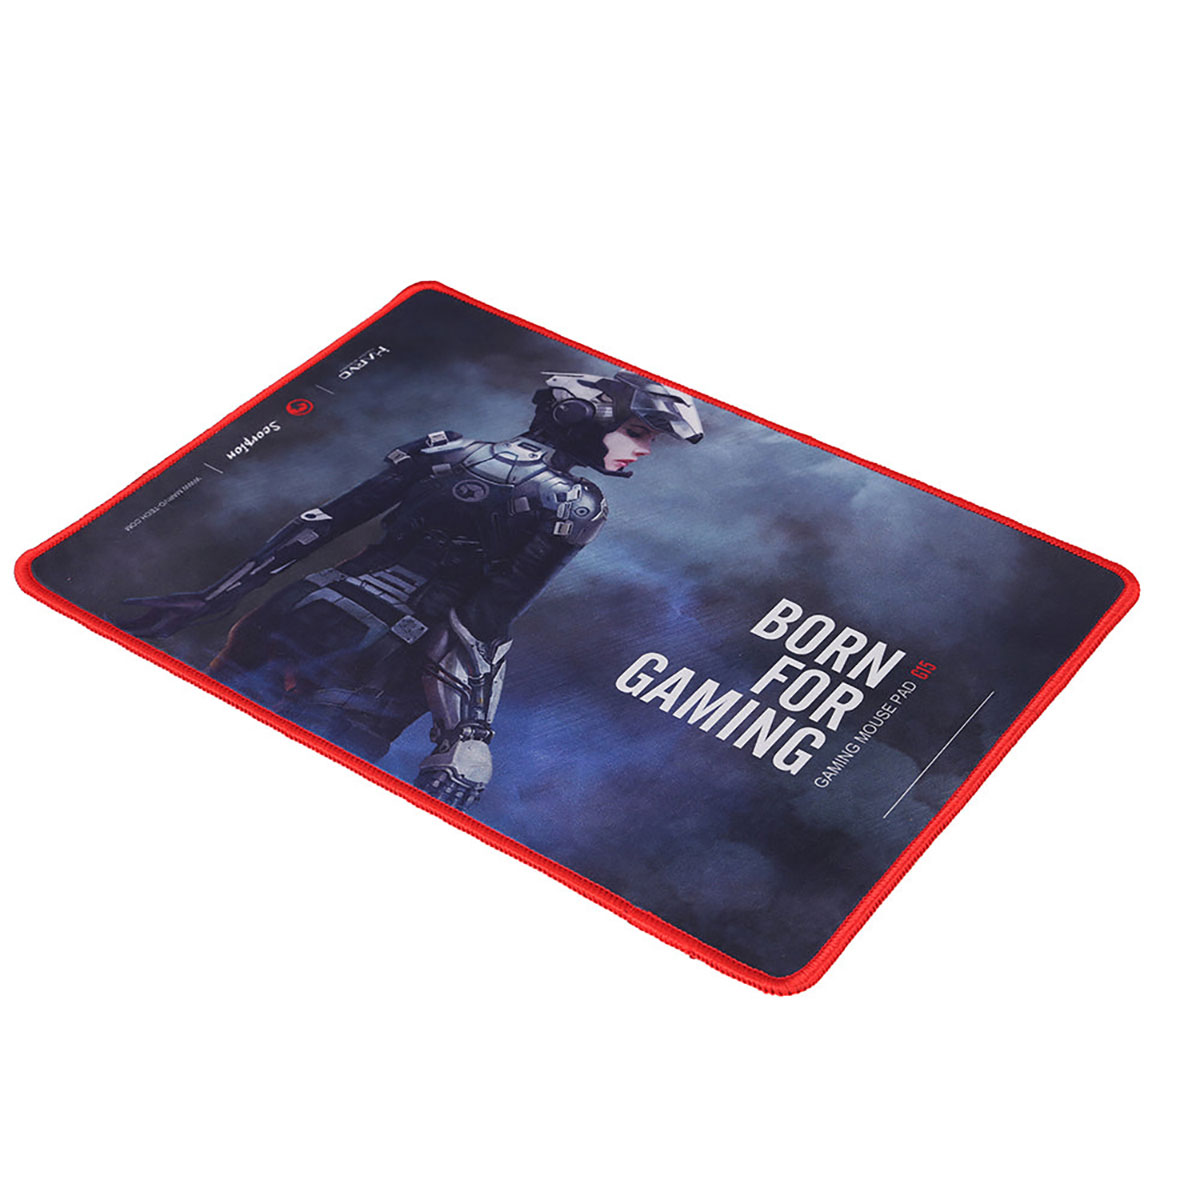 g15-mouse-pad-small-02